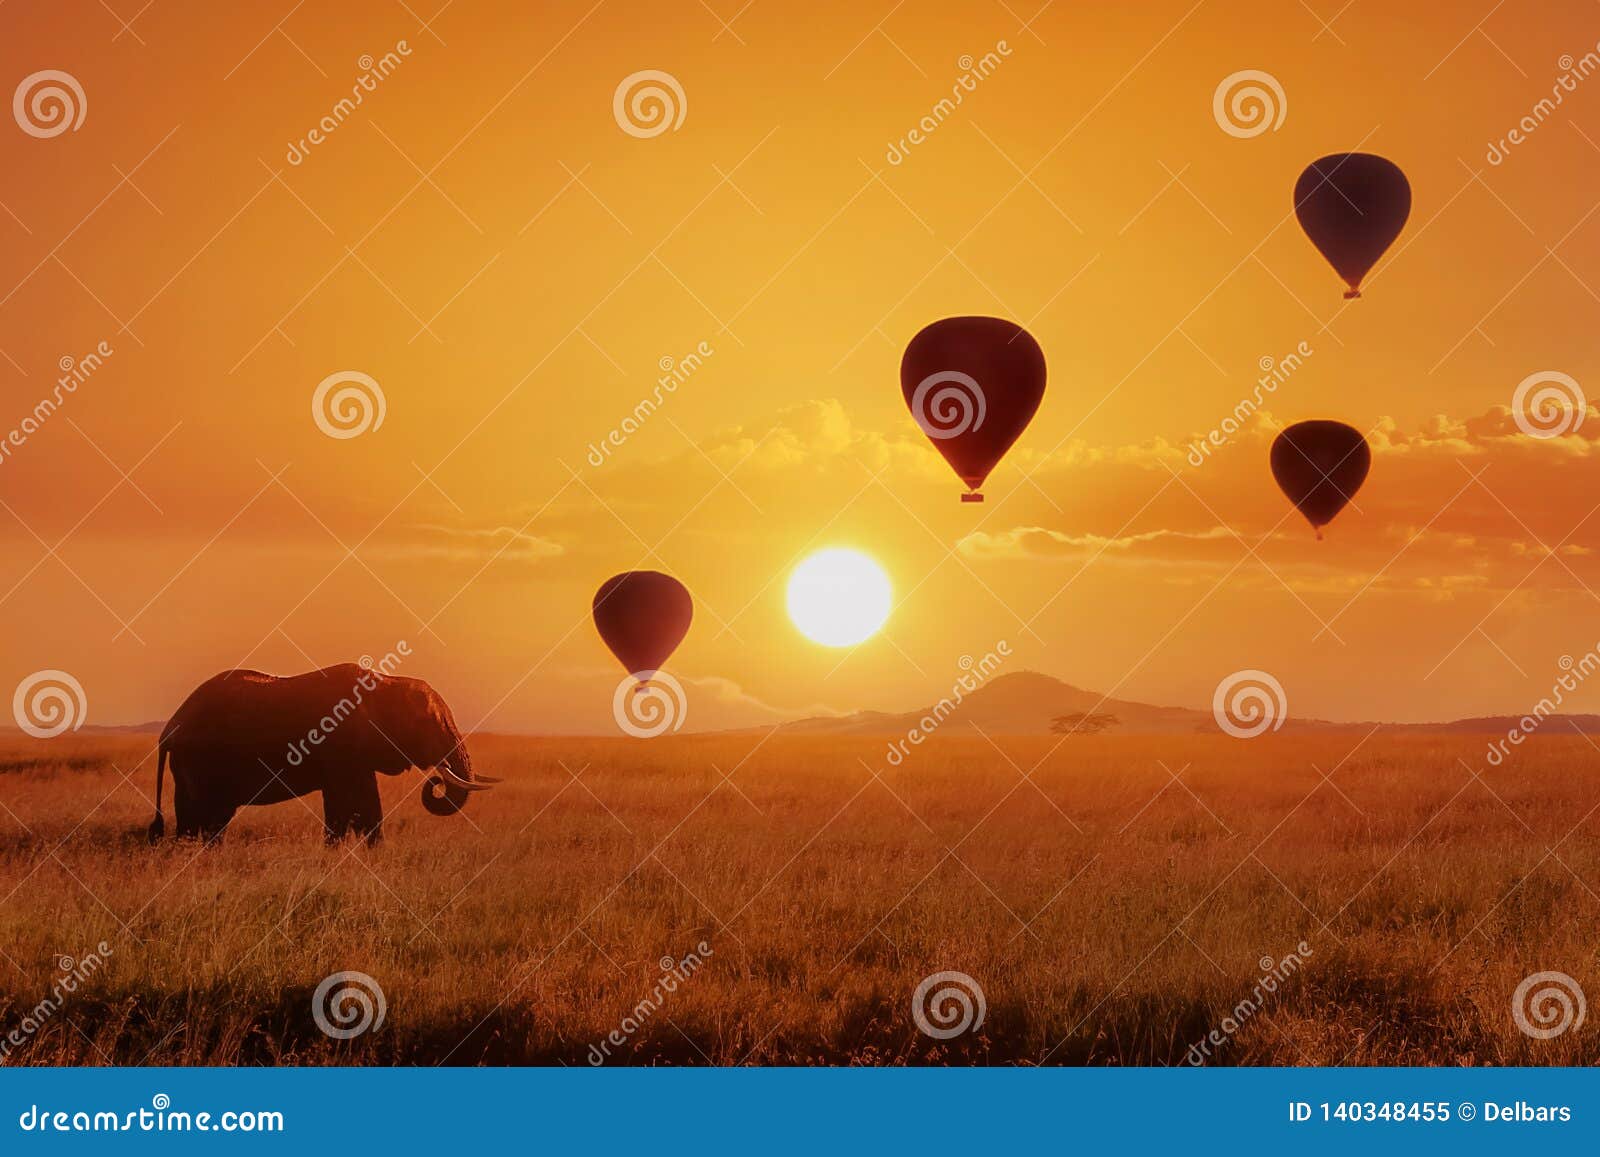 lonely african elephant against the sky with balloons at sunset. african fantastic image. africa, tanzania, serengeti national pa